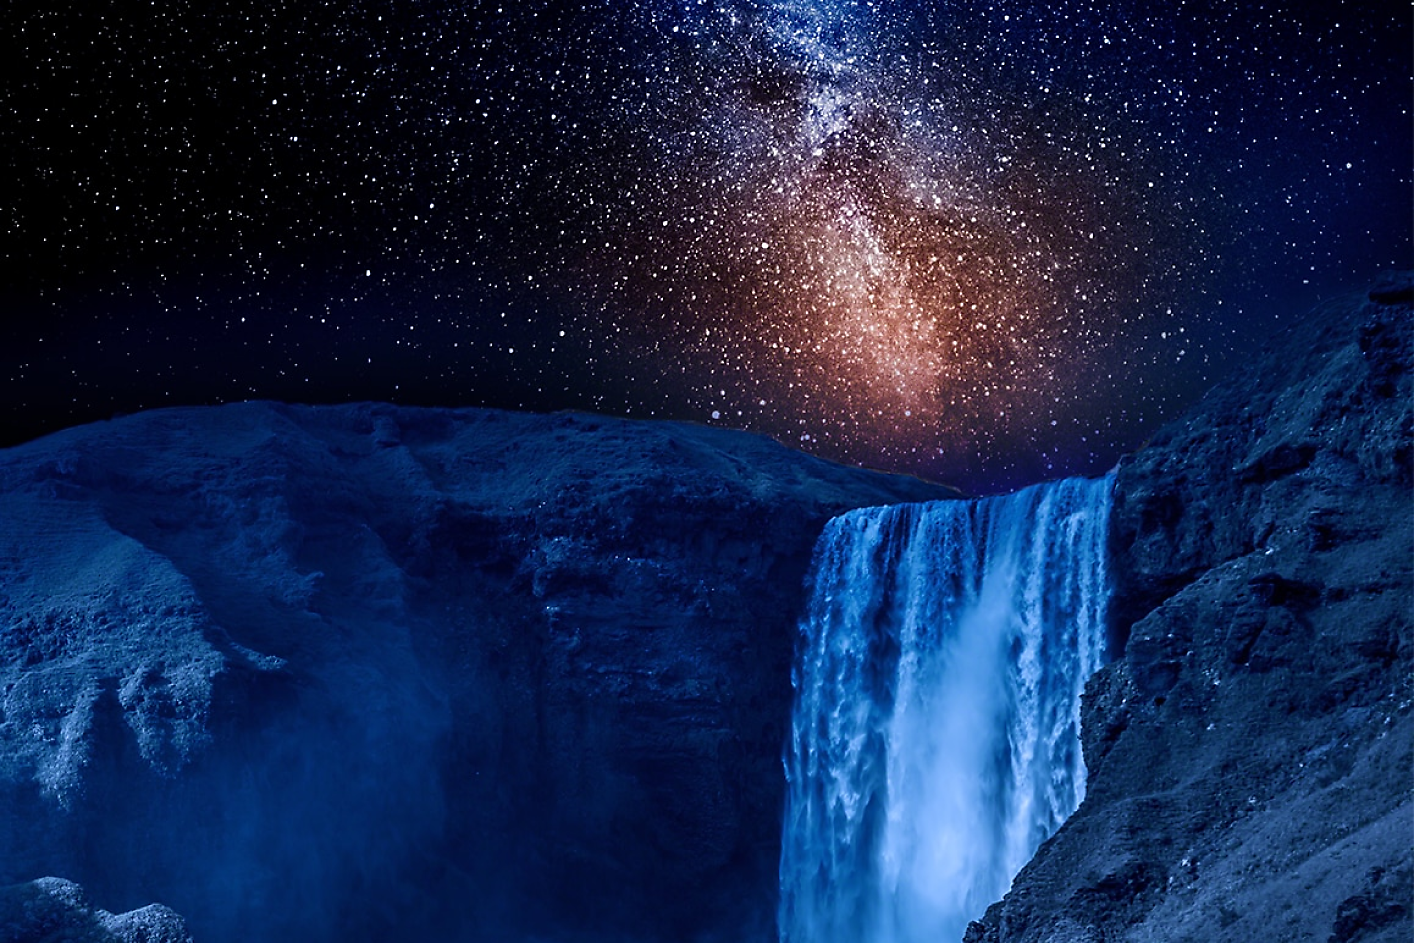 A dark blue waterfall is seen with a starry night sky in the background